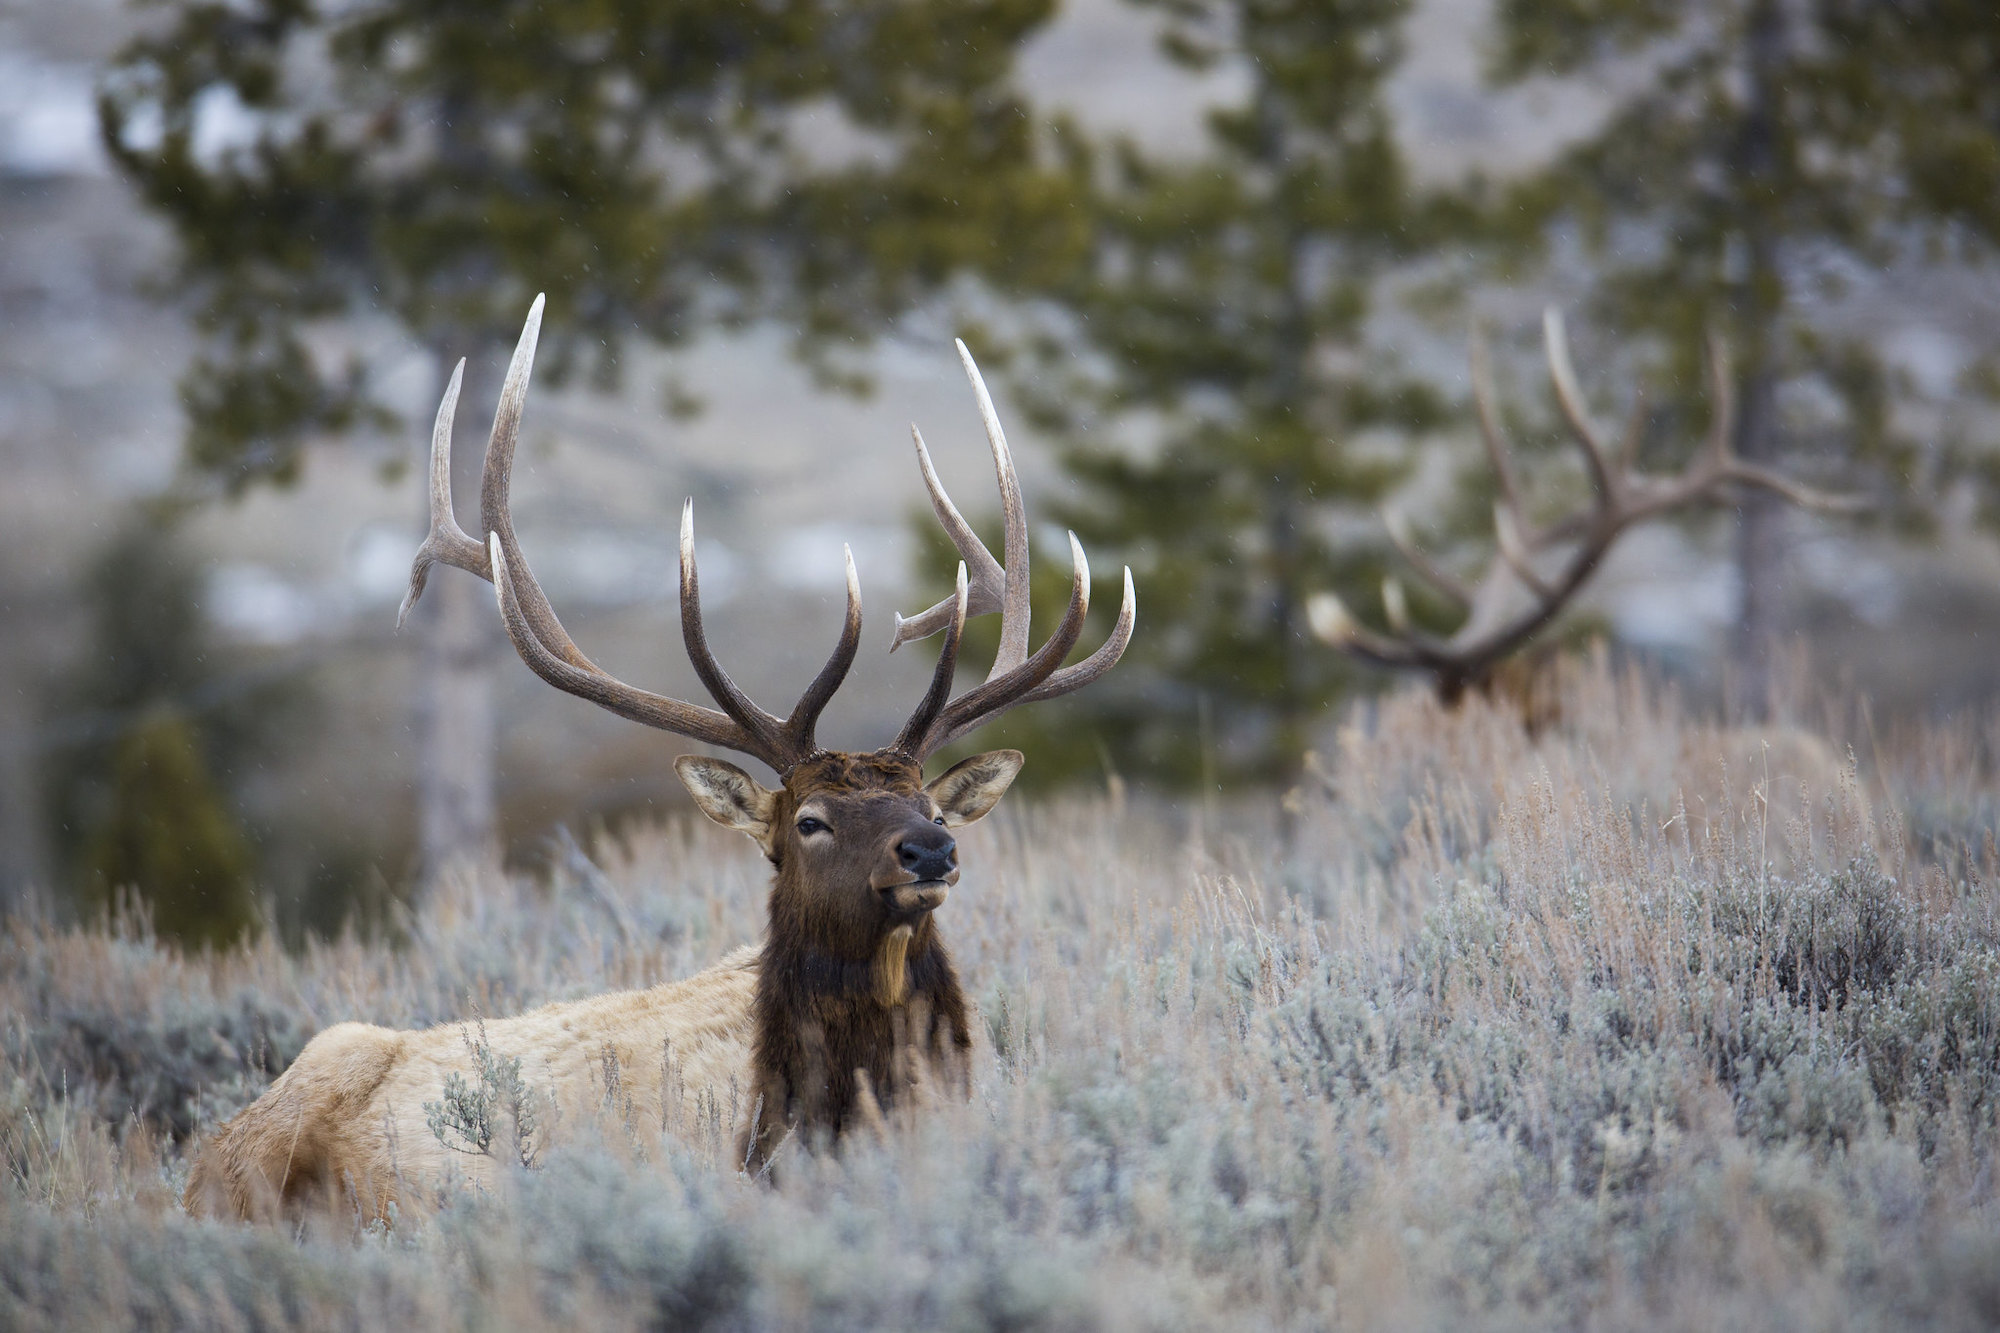 The new report takes a closer look at New Mexico's elk license allocation program.